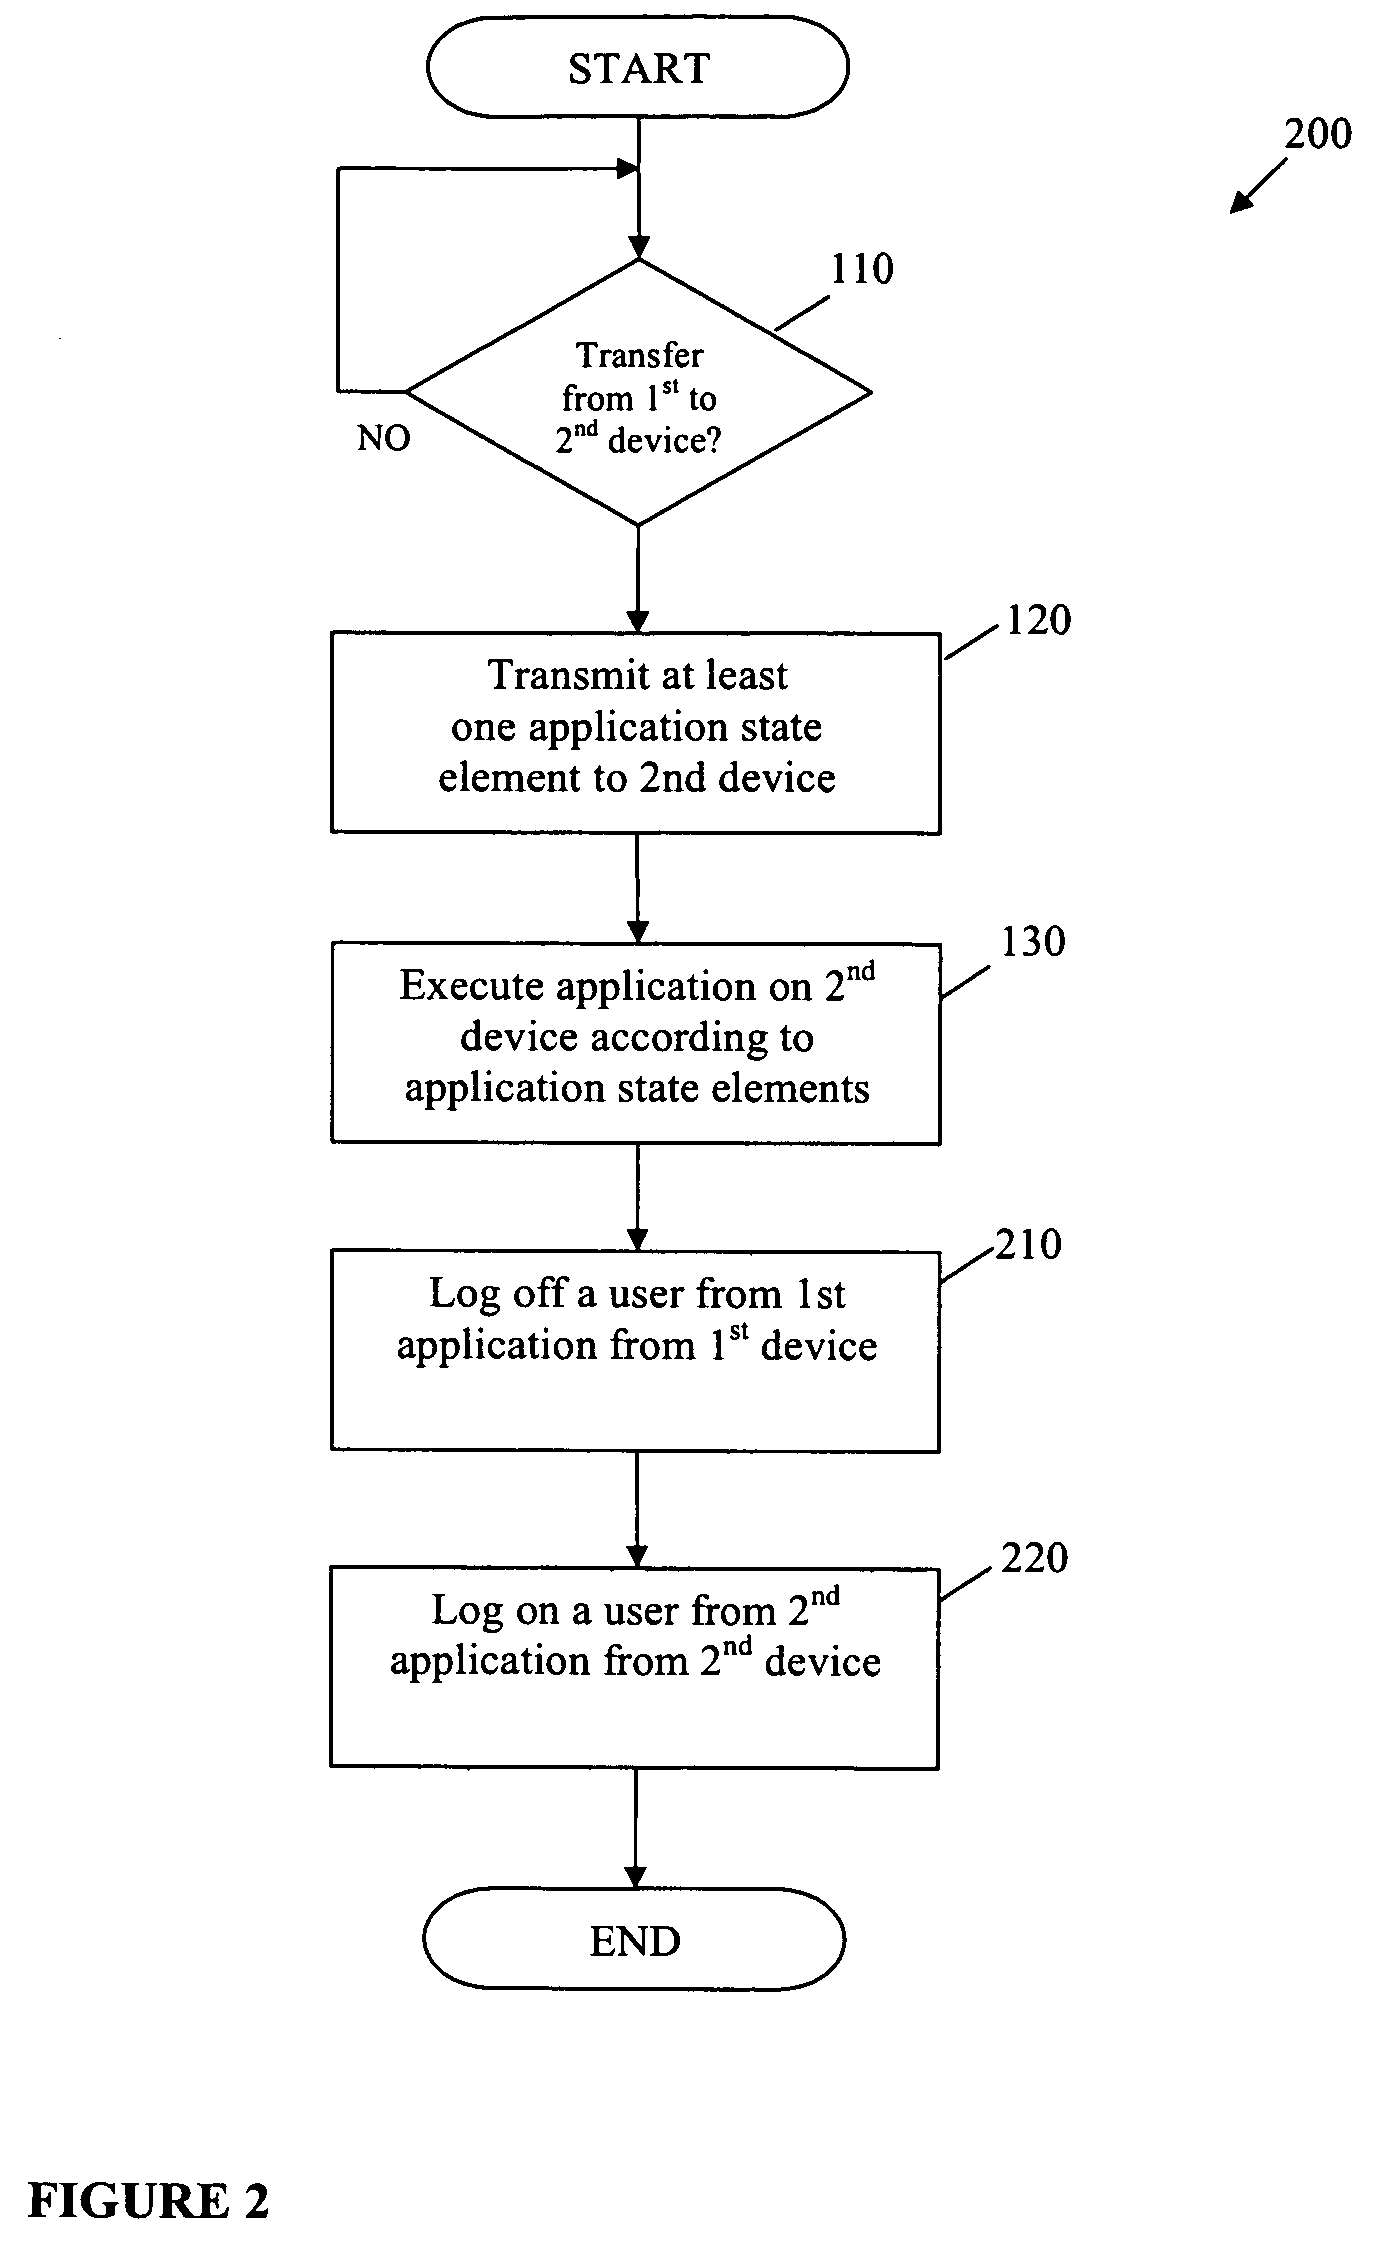 Method and system for transferring an application state from a first electronic device to a second electronic device